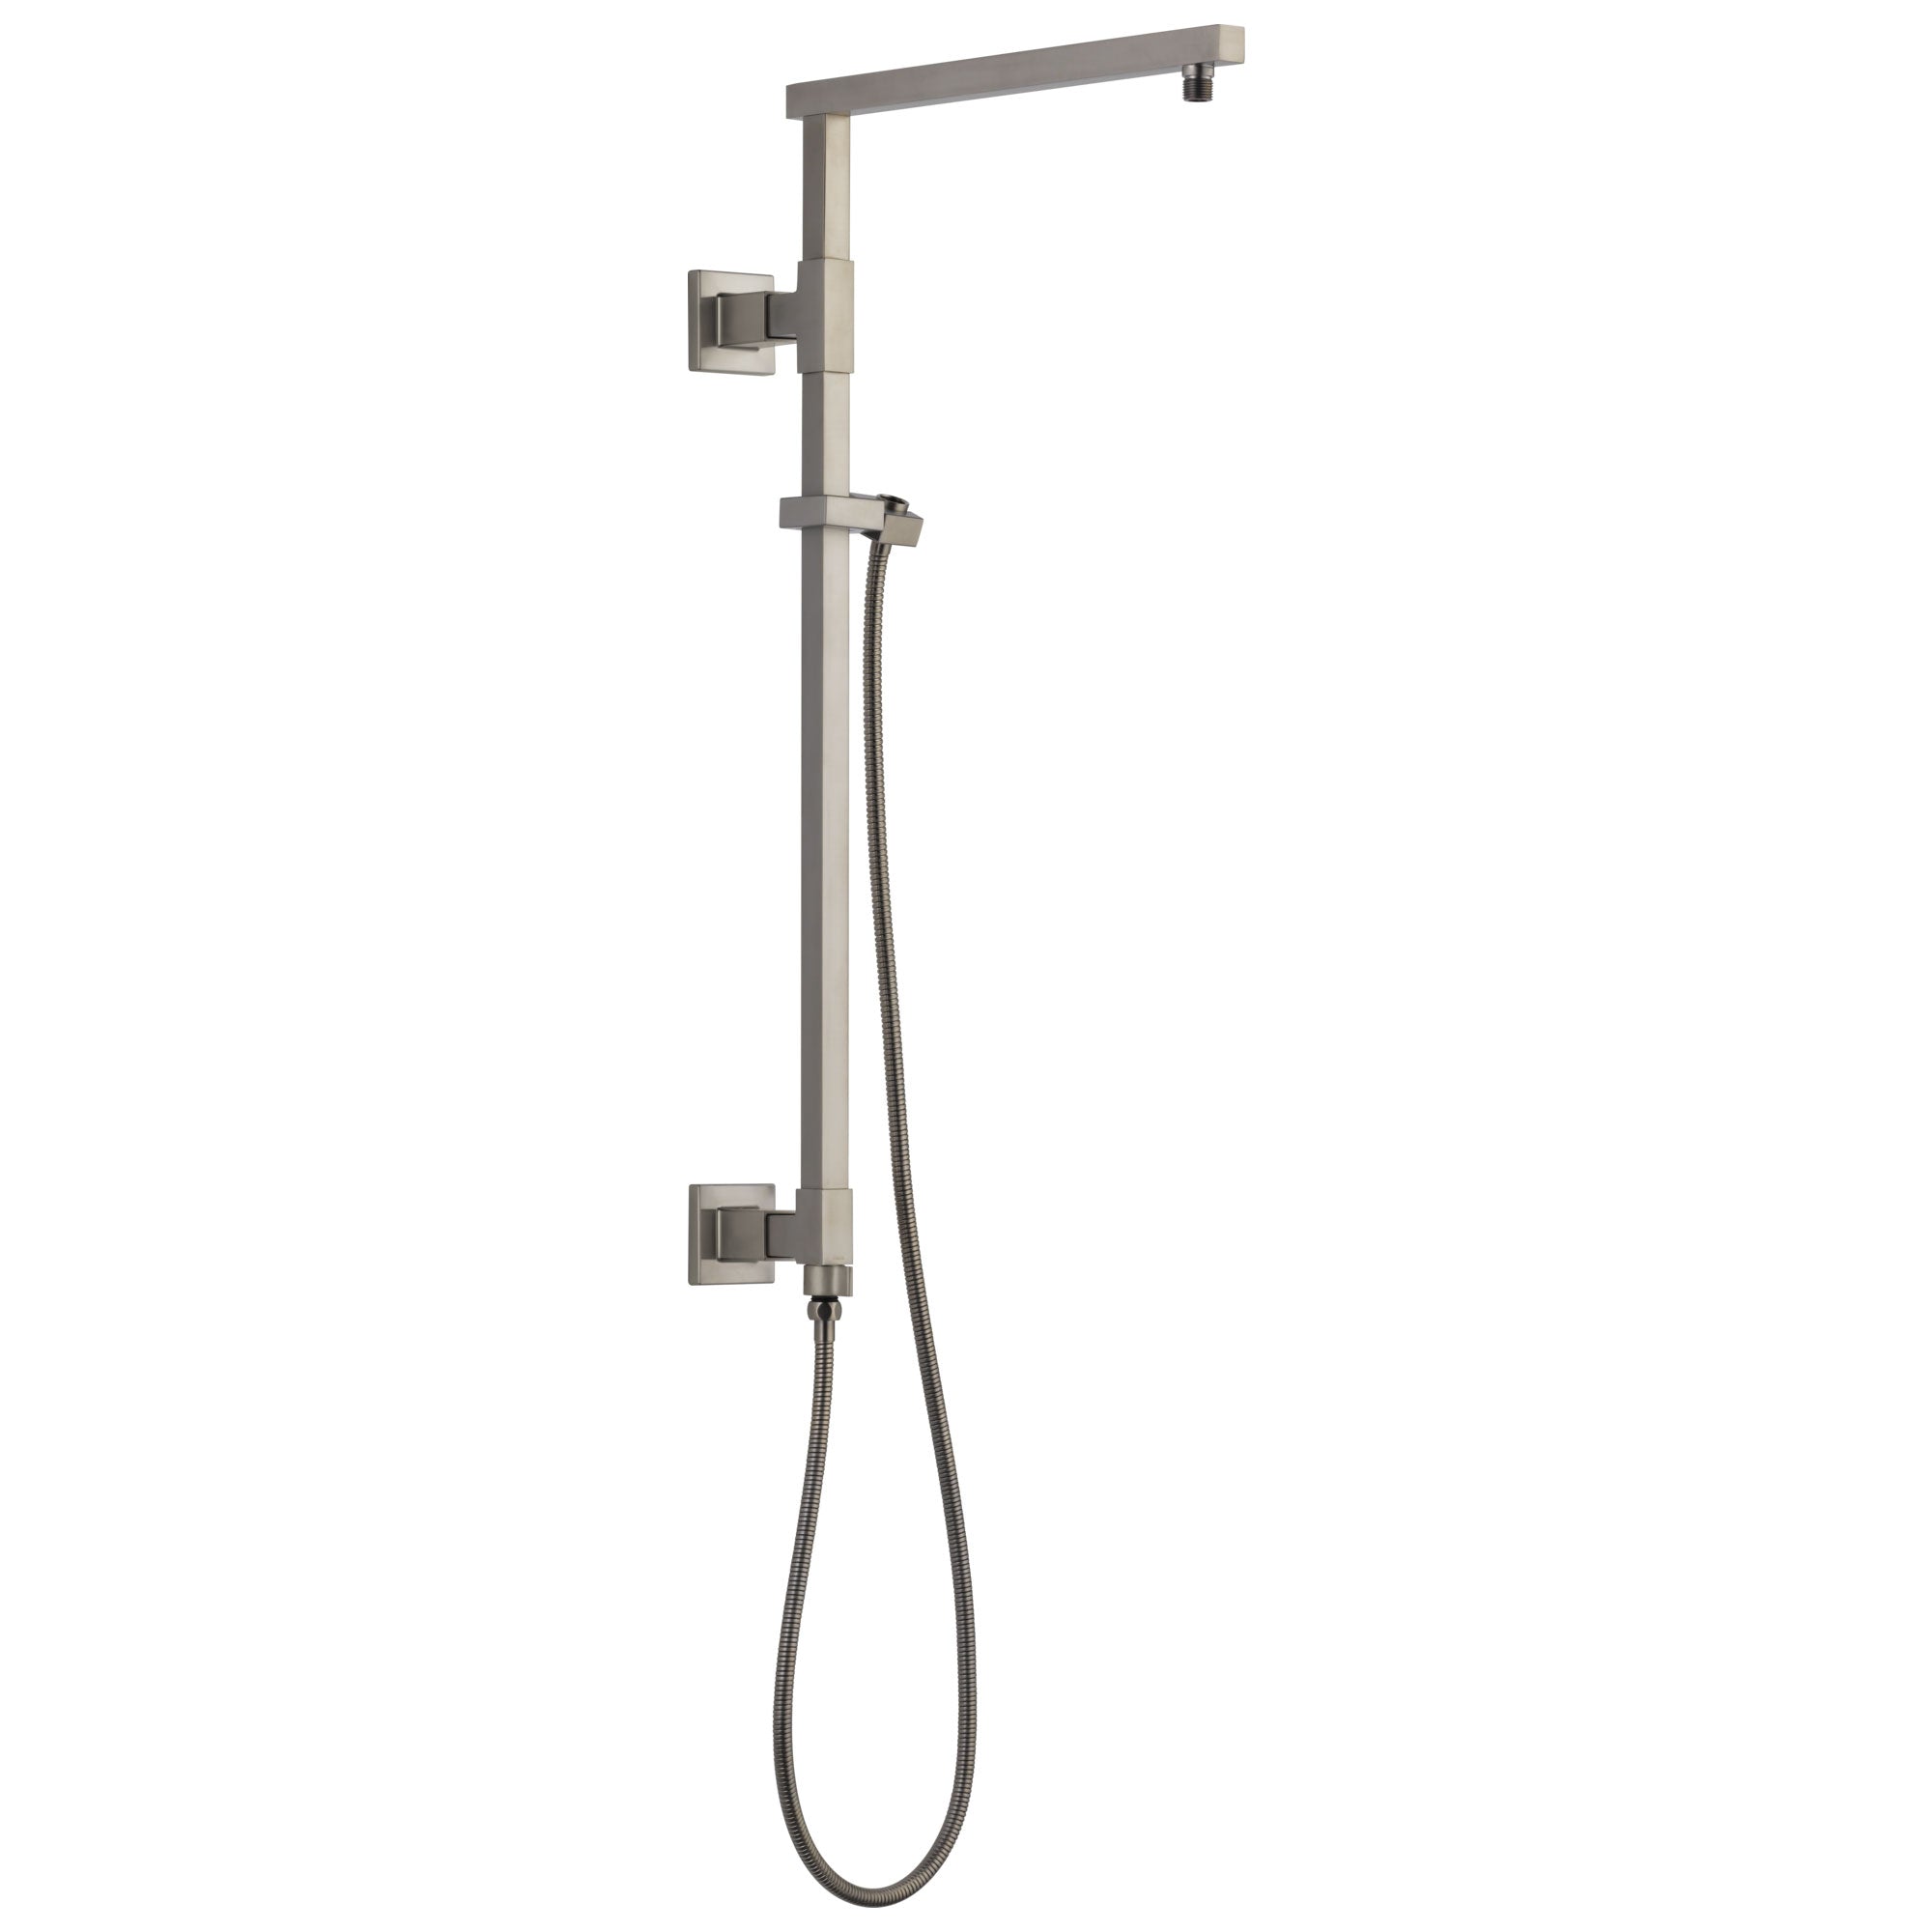 Delta Stainless Steel Finish Emerge Modern Angular Square Shower Column 26" (Requires Showerhead, Hand Spray, and Control) D58420SS